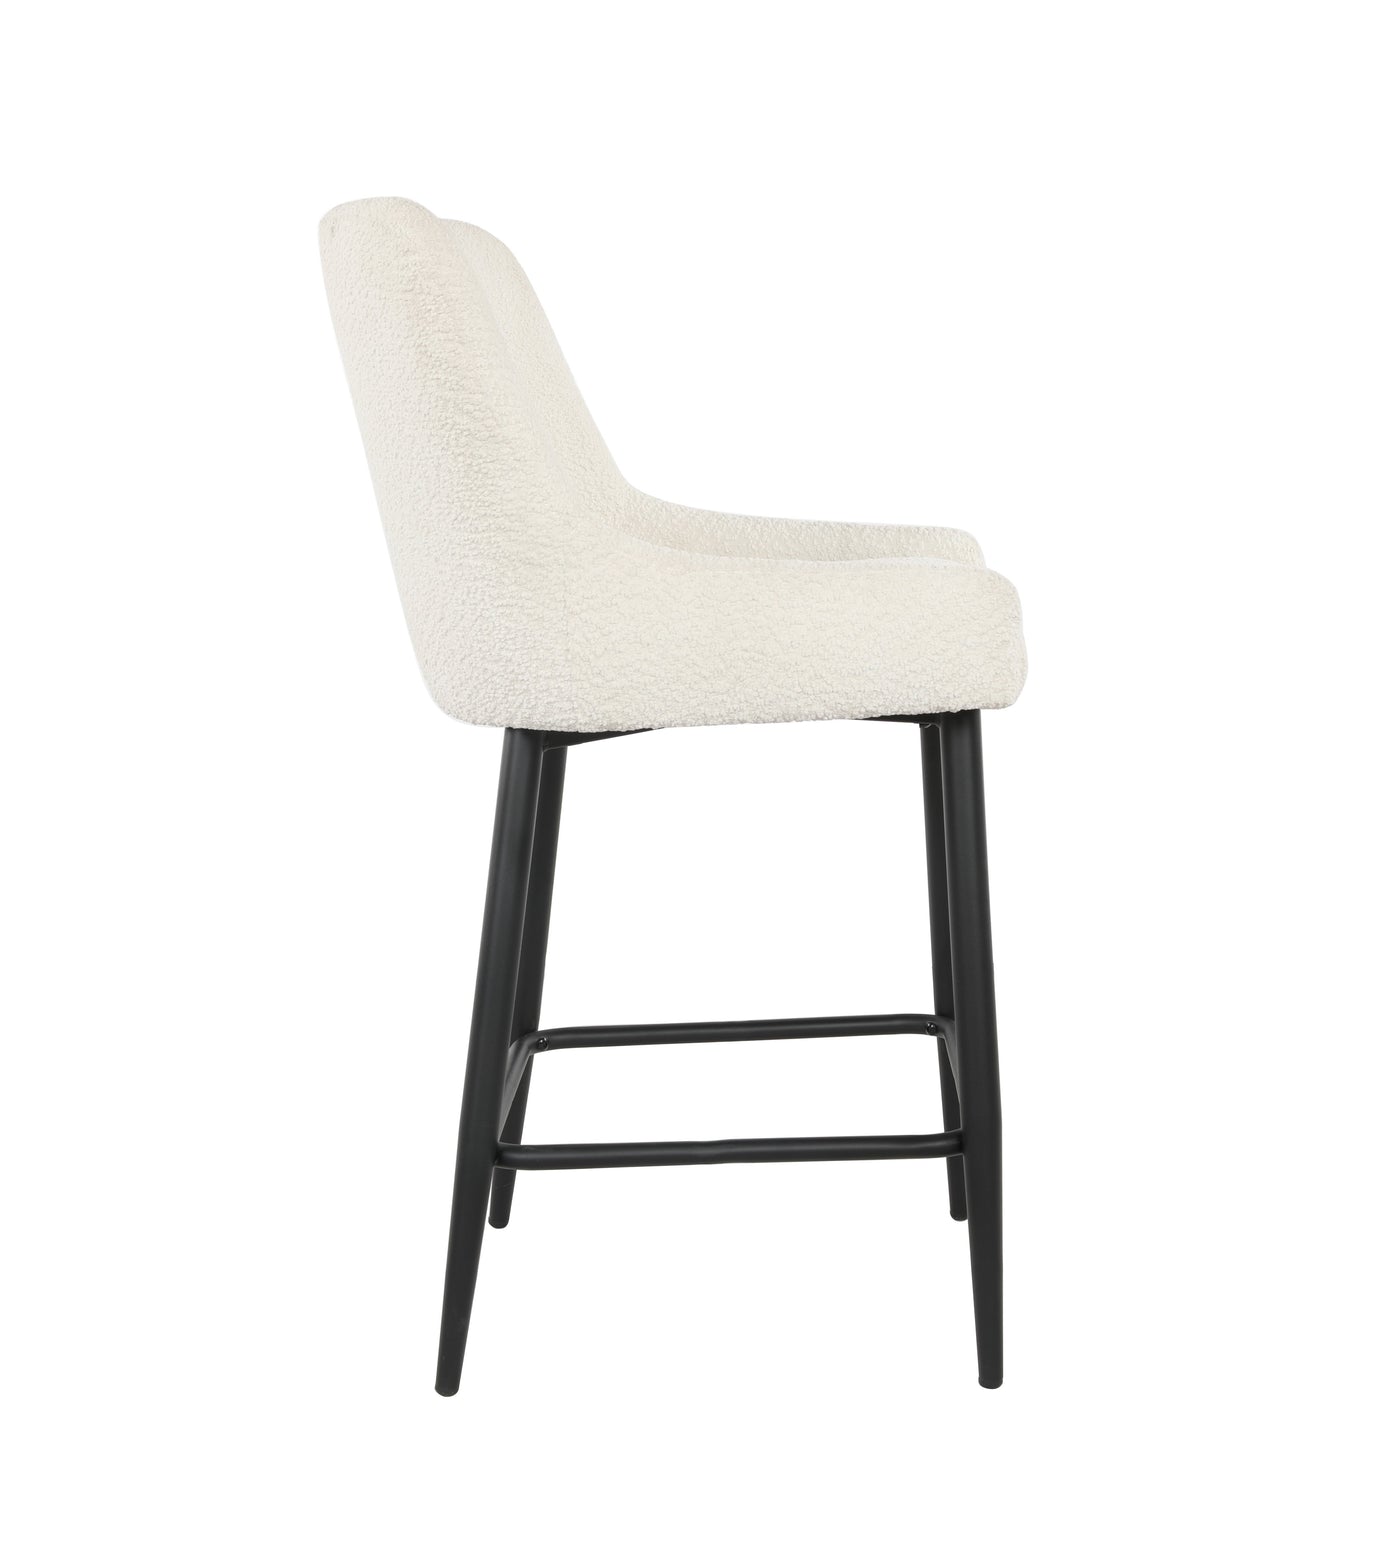 Linwood Counter Height Stool - White